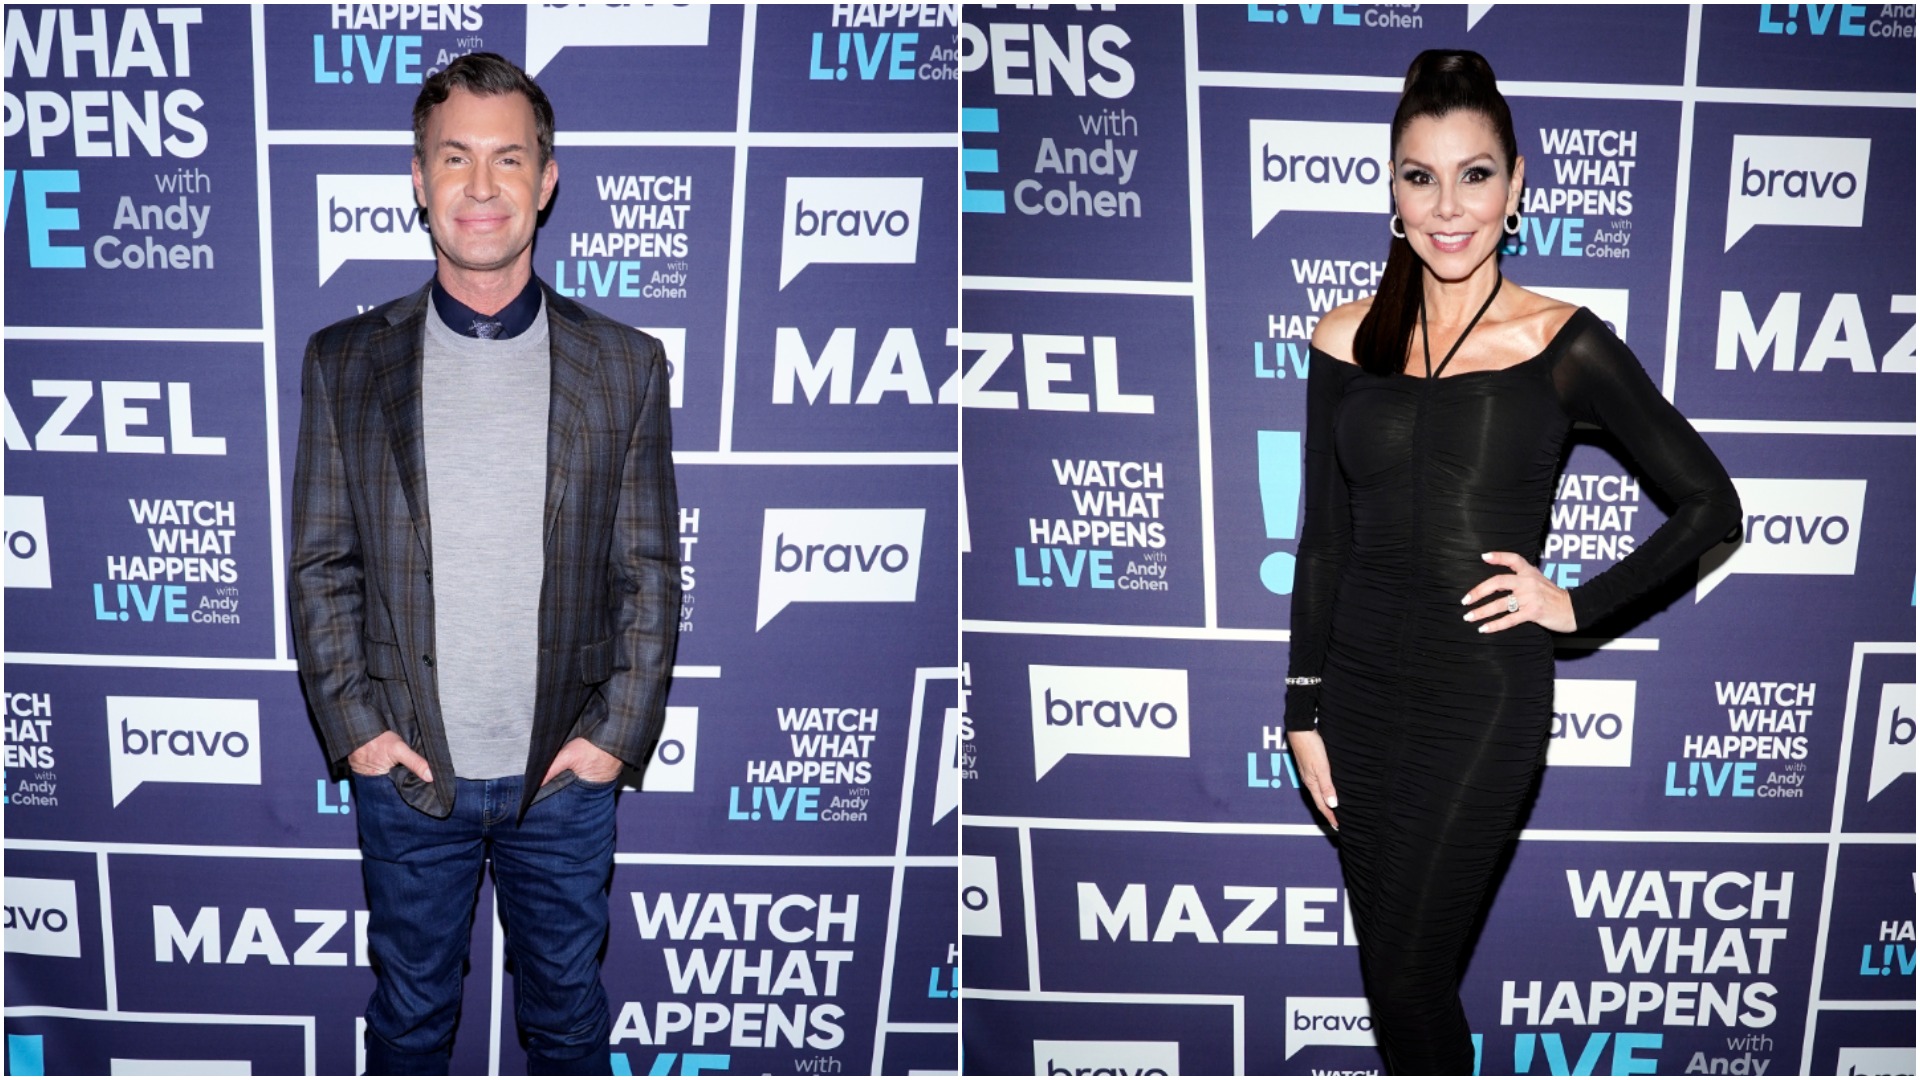 Heather Dubrow from 'RHOC' laughed at Jeff Lewis's comment that she's a bad person